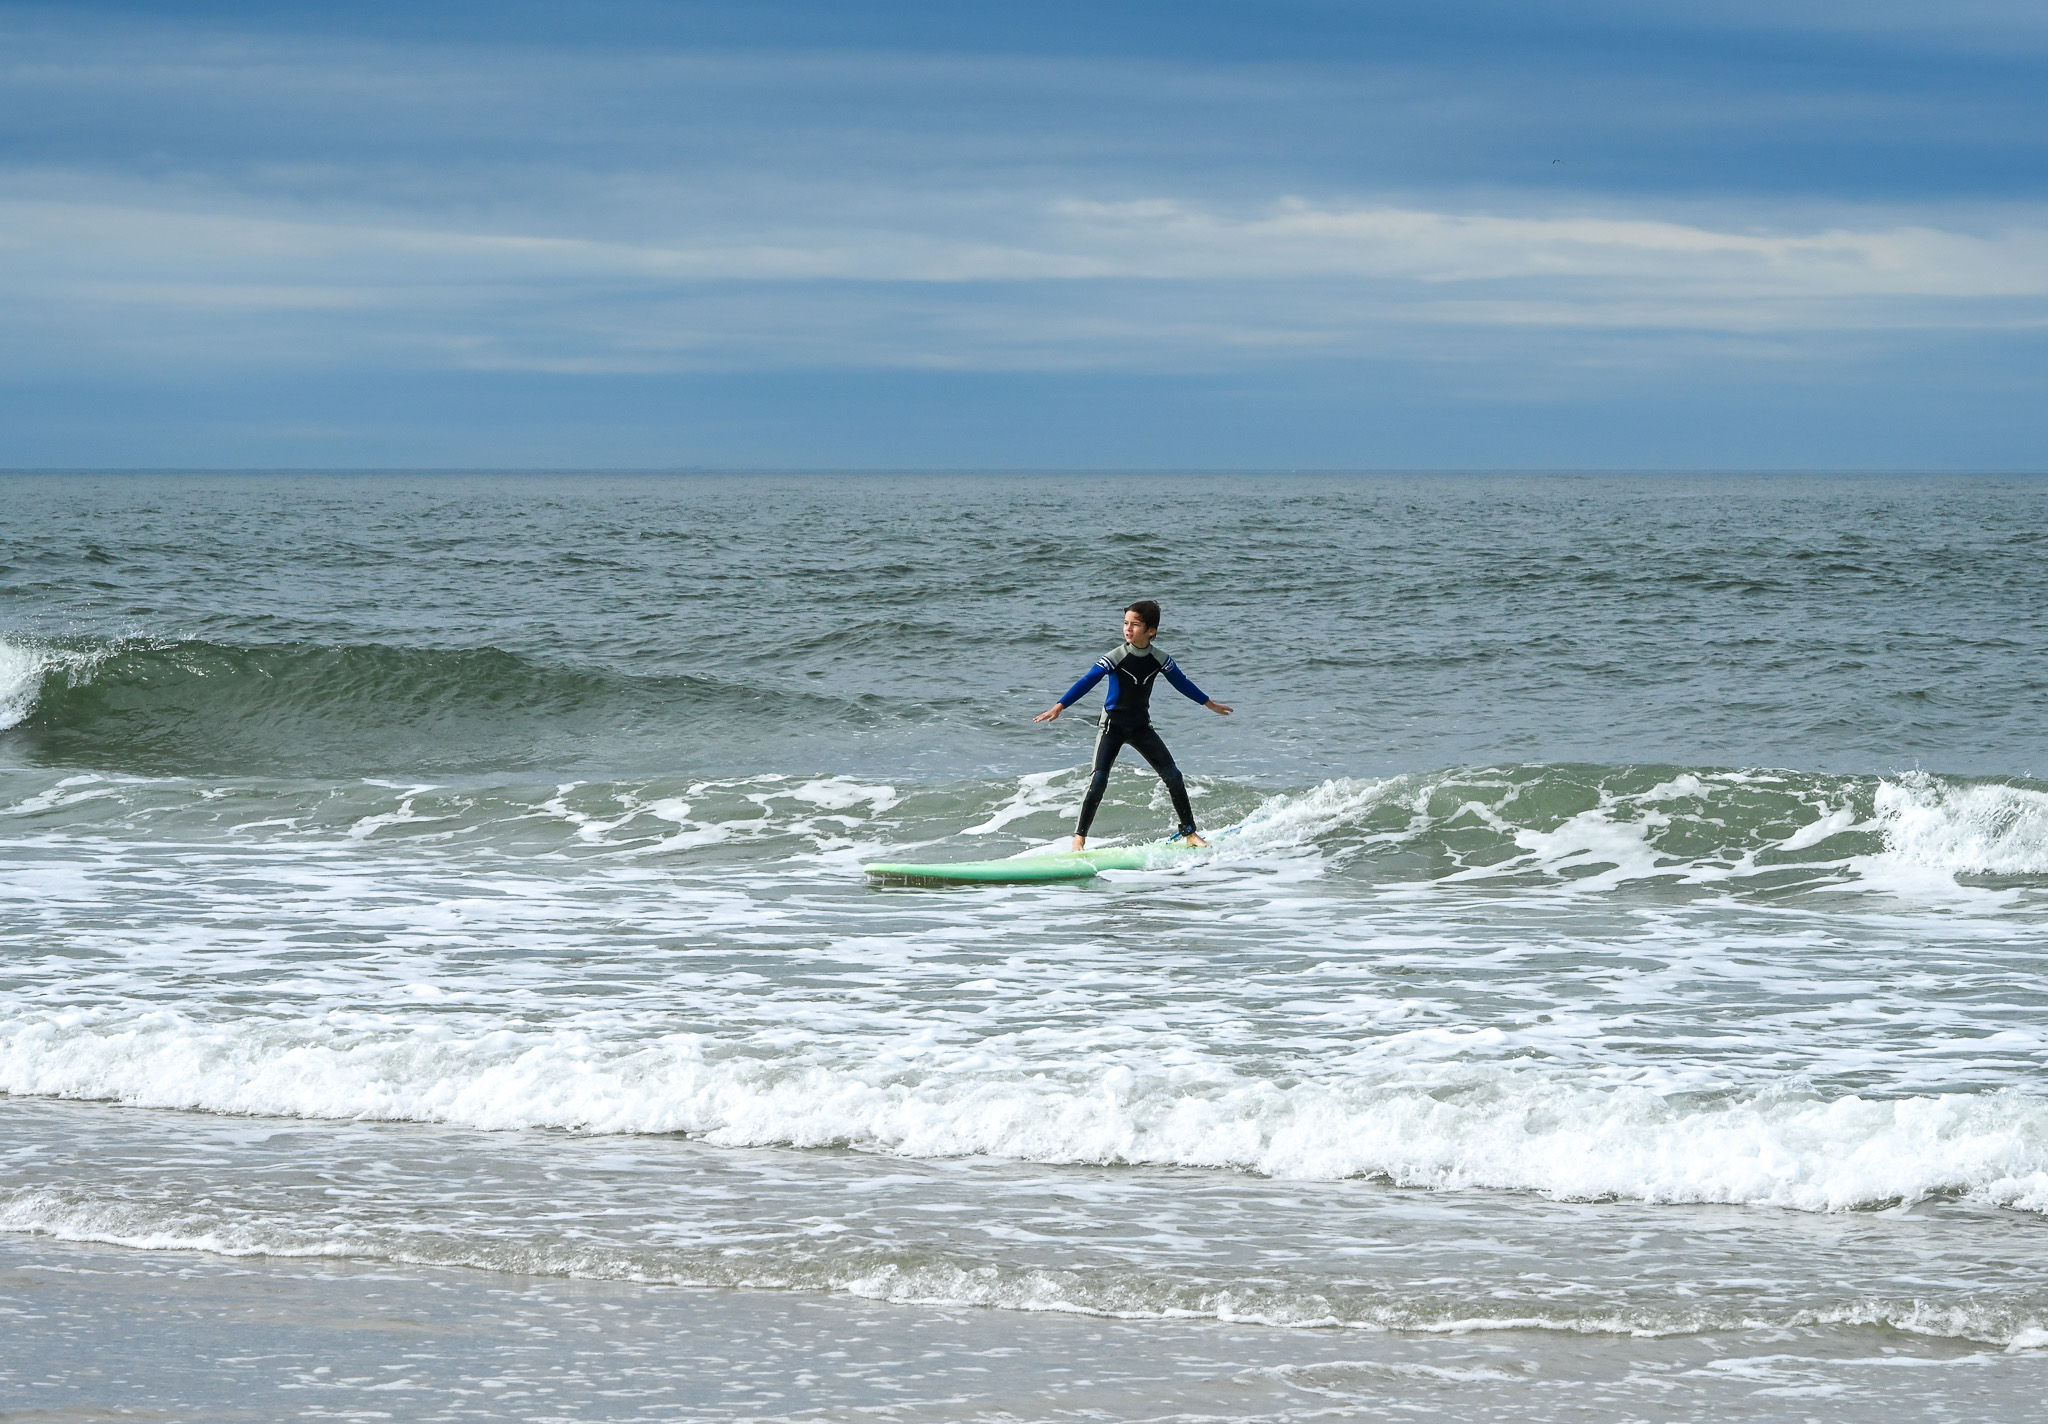 A boy Learning to Surf at the Cove.